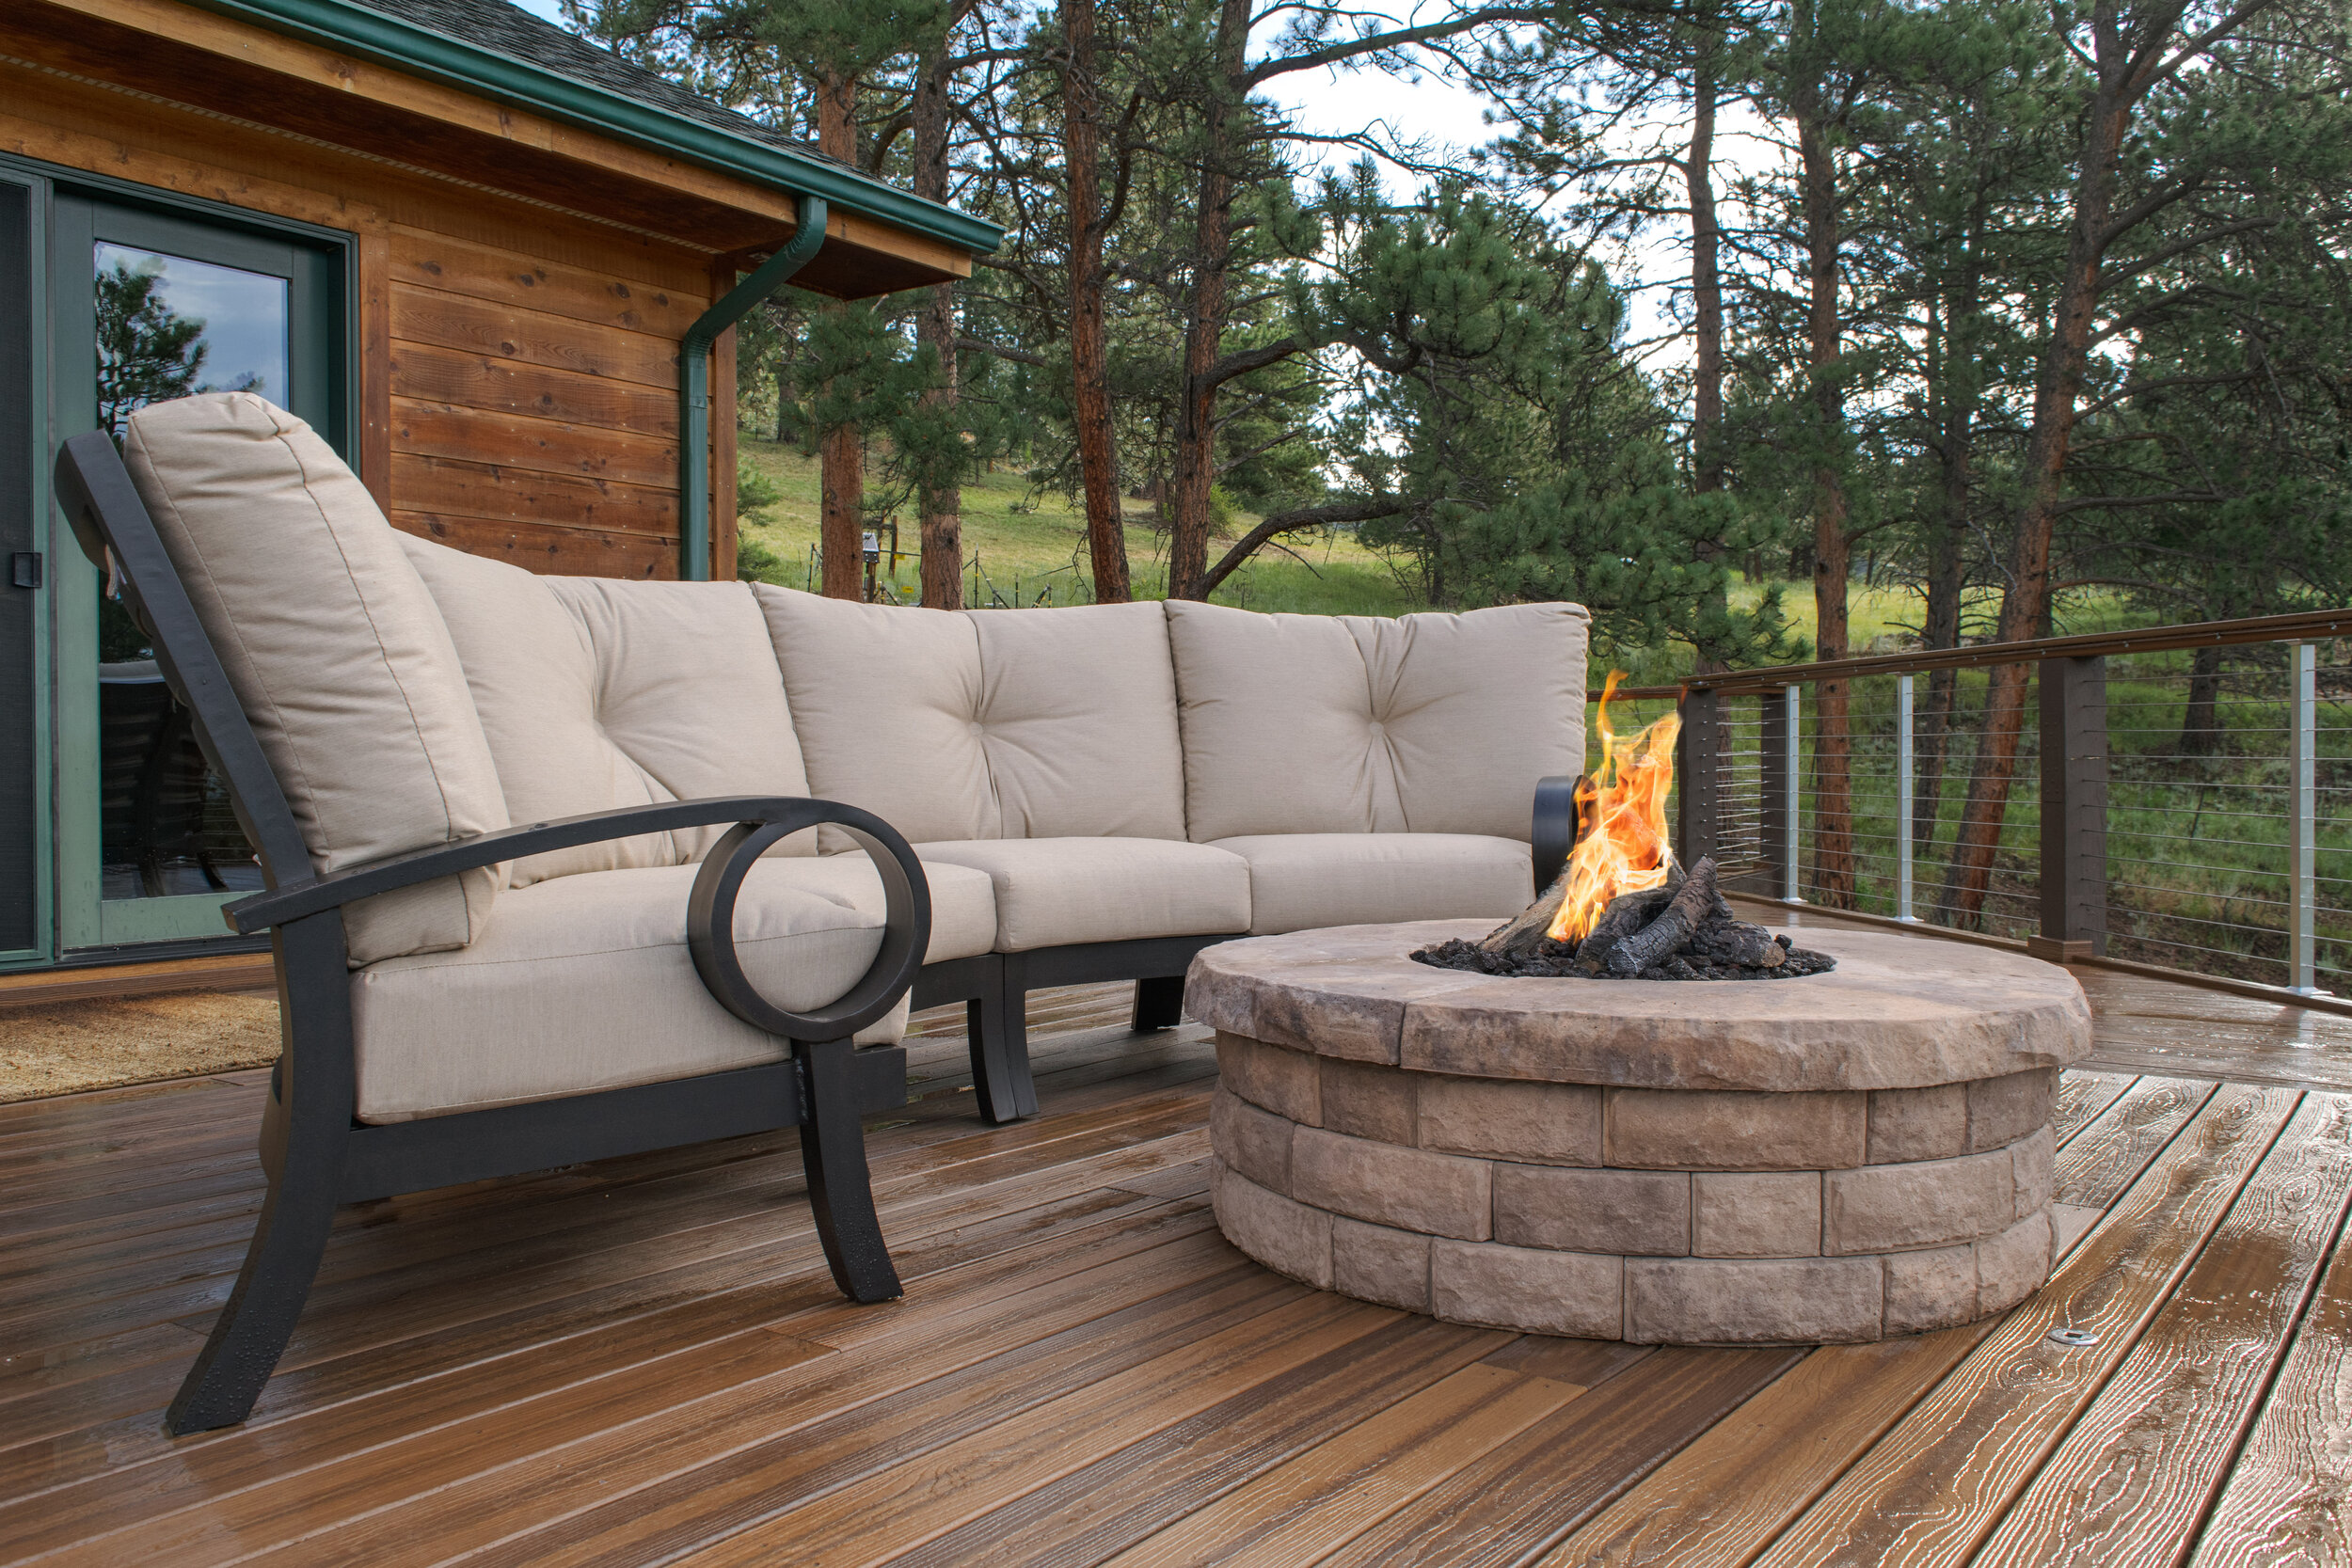 Outdoor Space With A Gas Fire Pit, Creating A Gas Fire Pit